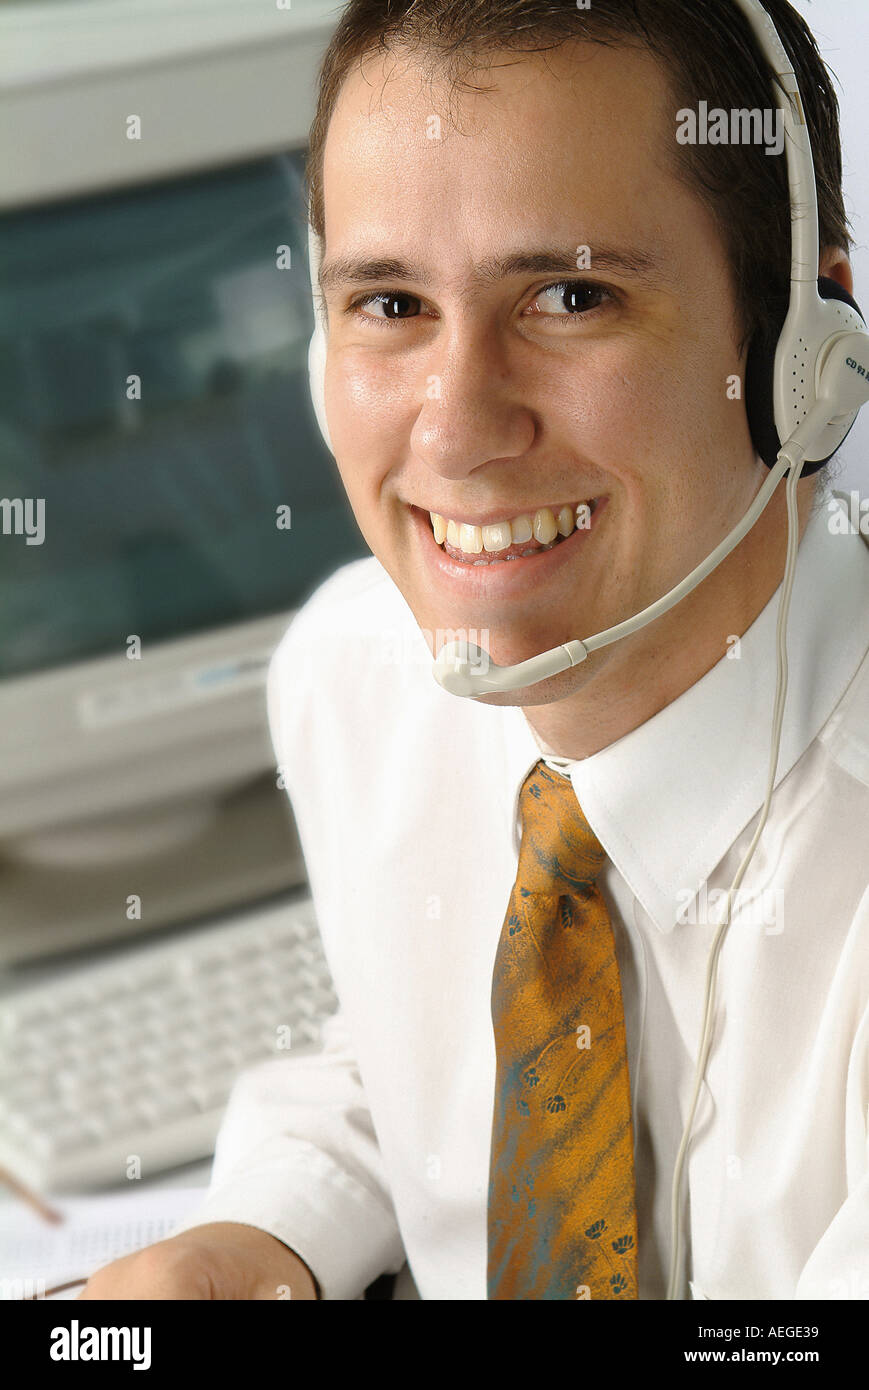 Businessman headset microphone glasses profile operator handsfree shirt tie smile smiling welcoming staring male person man peop Stock Photo